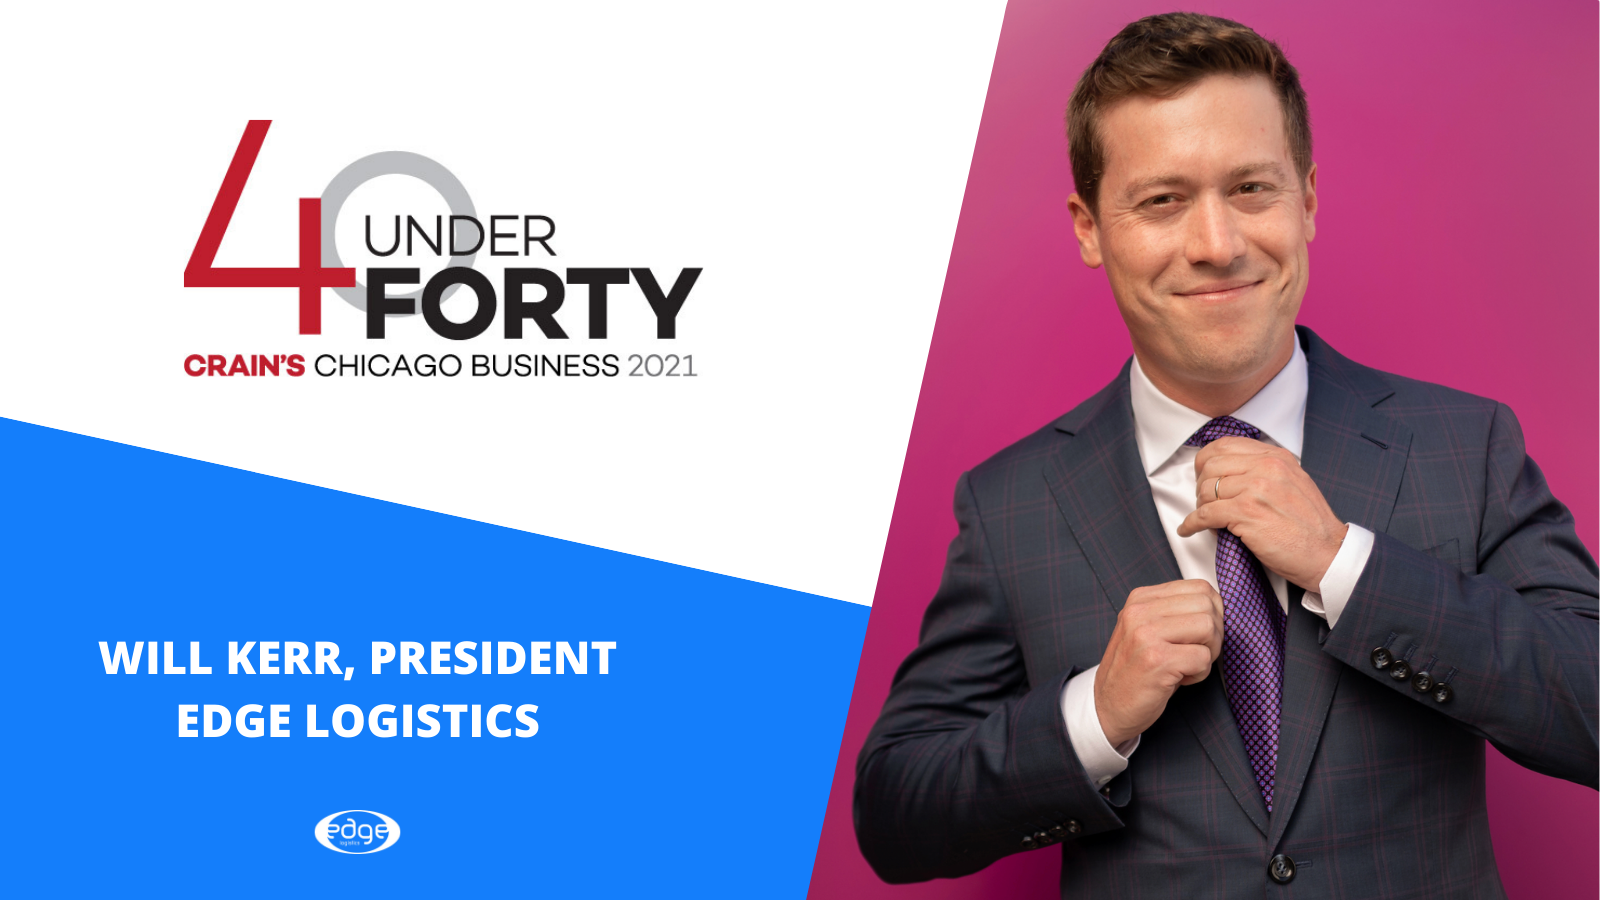 Crain's Chicago includes Edge Logistics President Will Kerr Among Prestigious 40 Under 40 Honorees for 2021